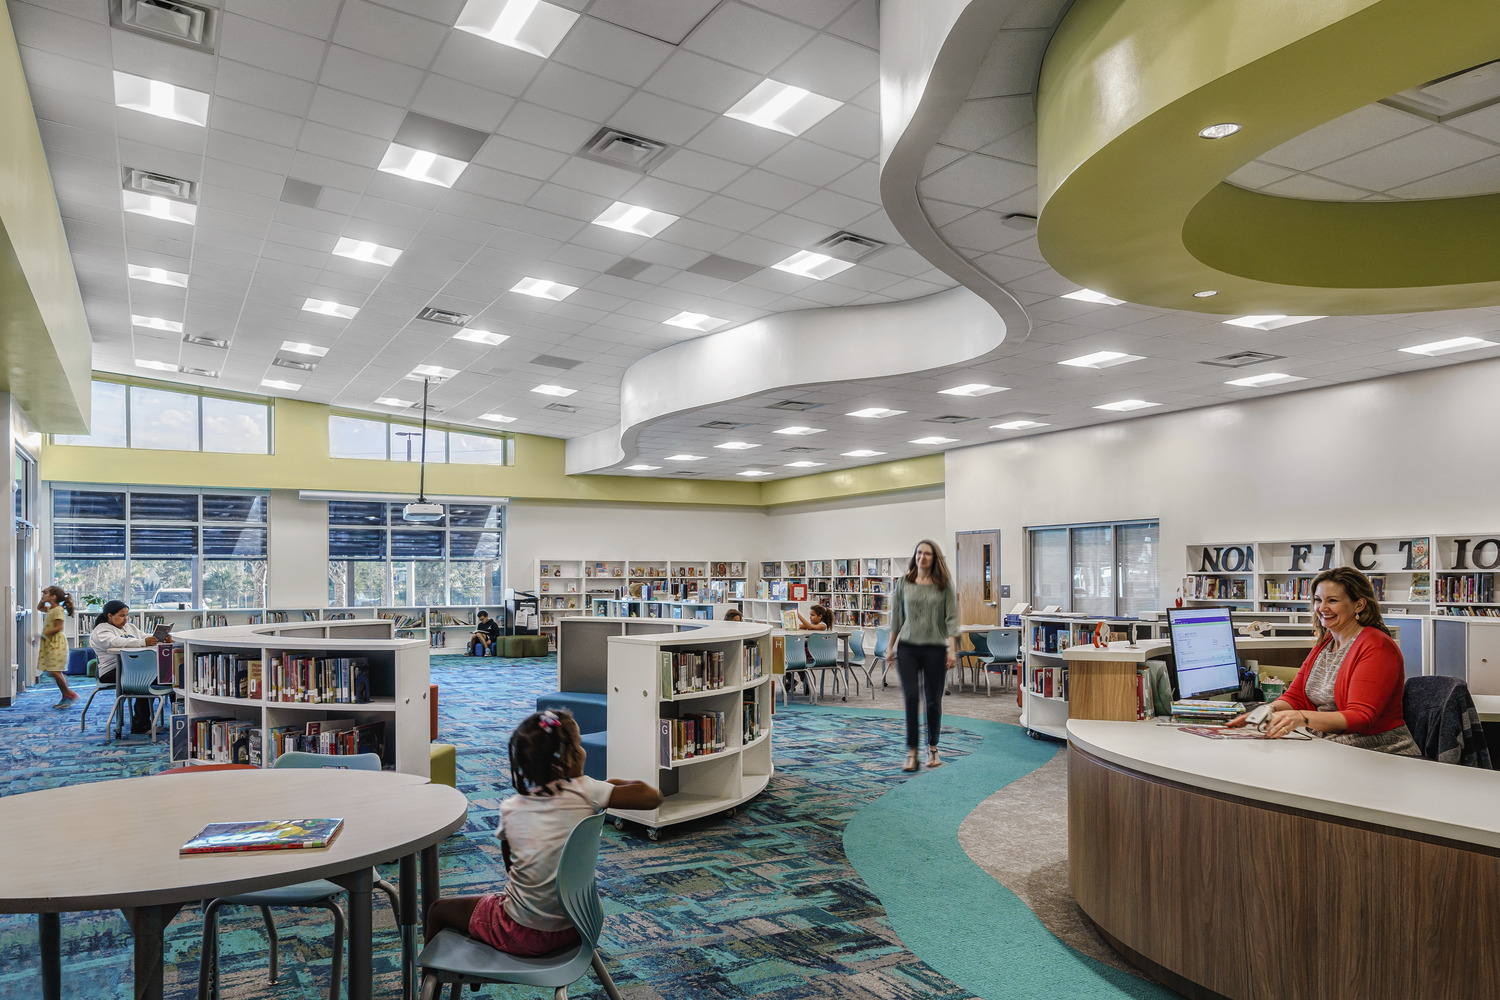 Large school library with curved fixtures and people walking around